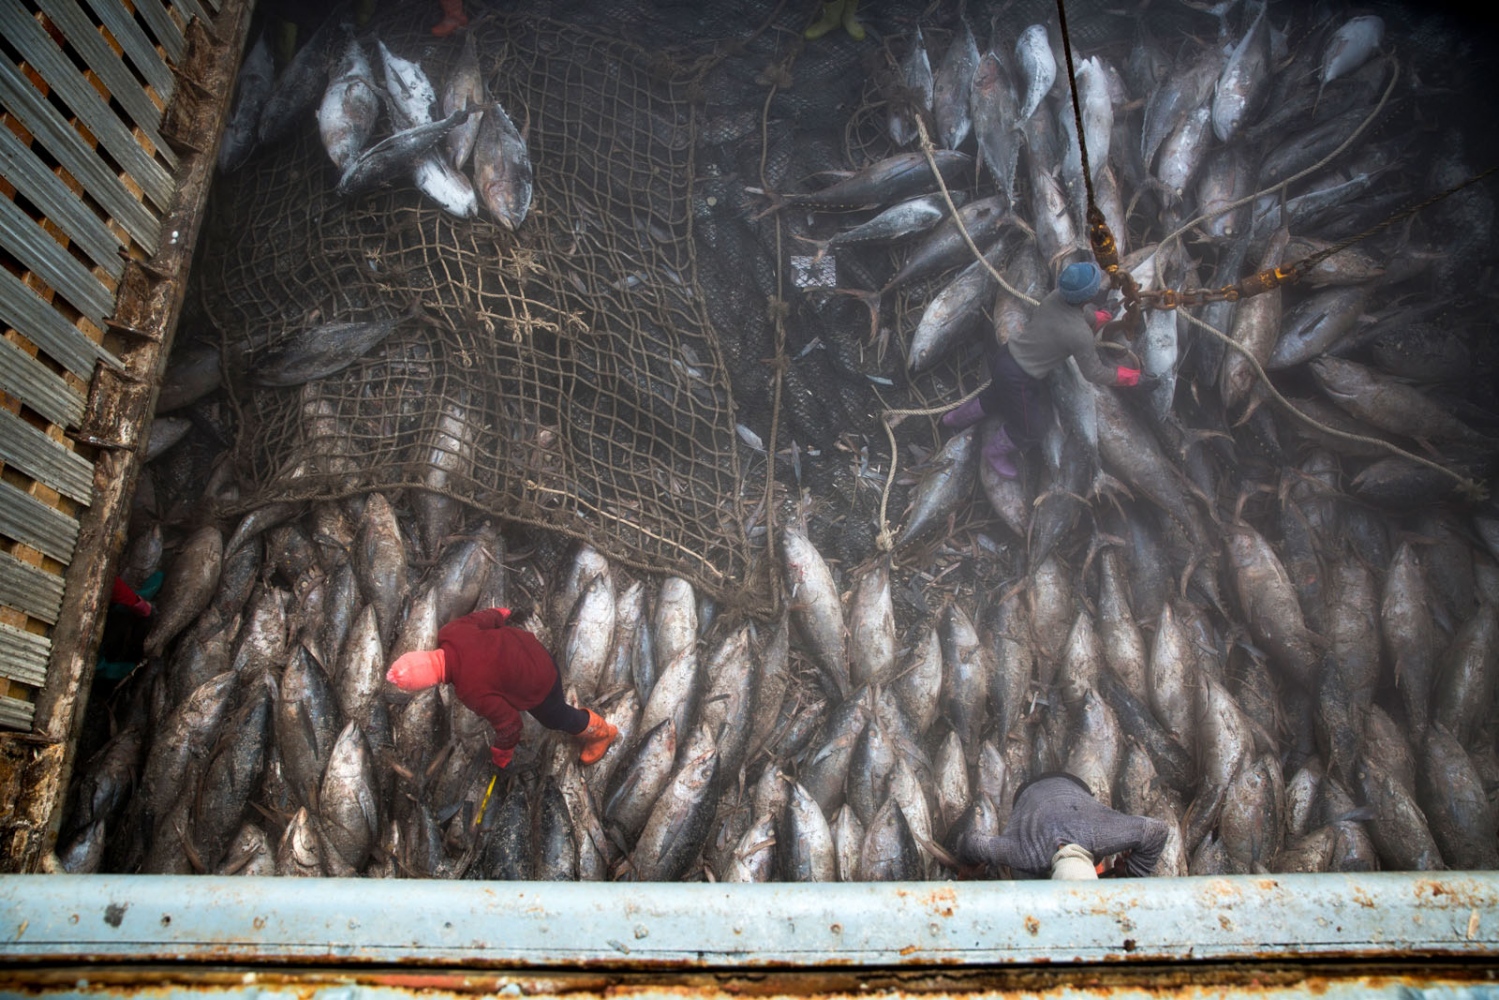 EMPTYING THE SEAS - Thai workers pull tuna into nets in the hold, where the...